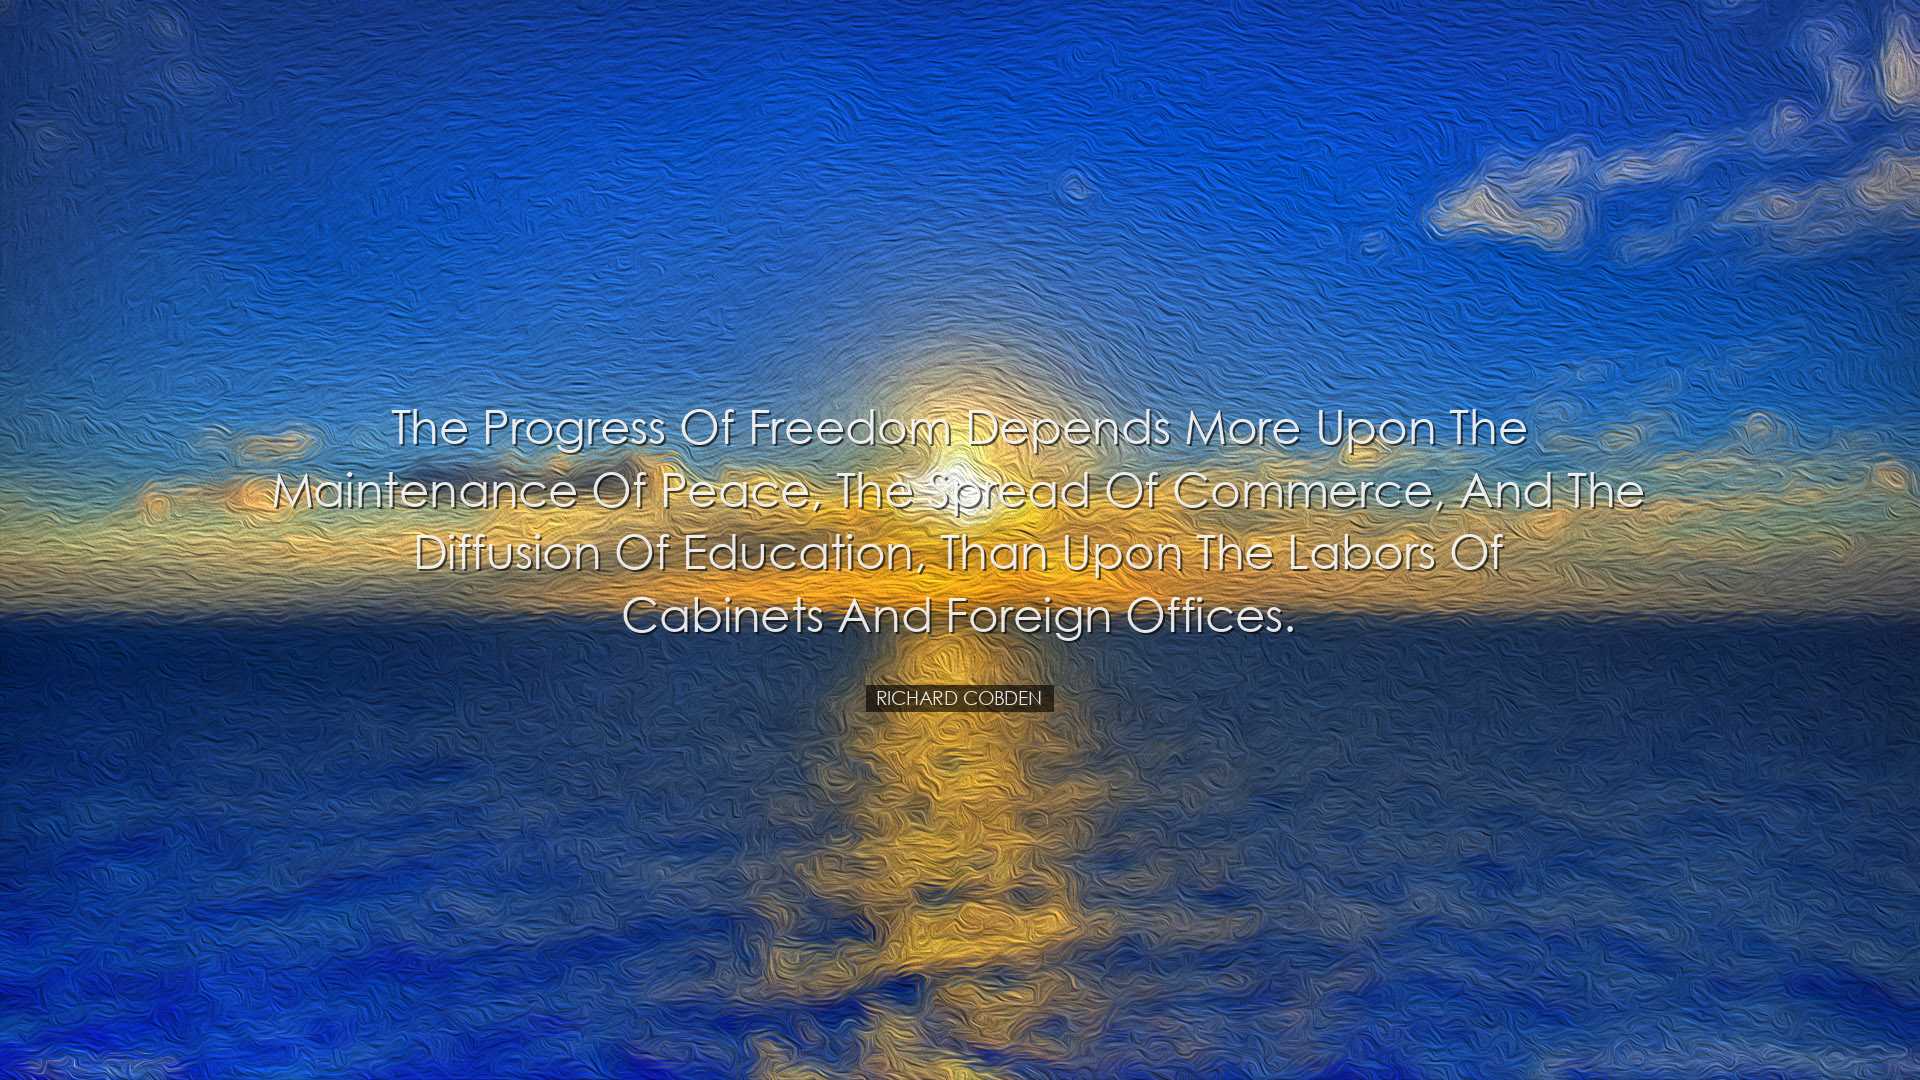 The progress of freedom depends more upon the maintenance of peace